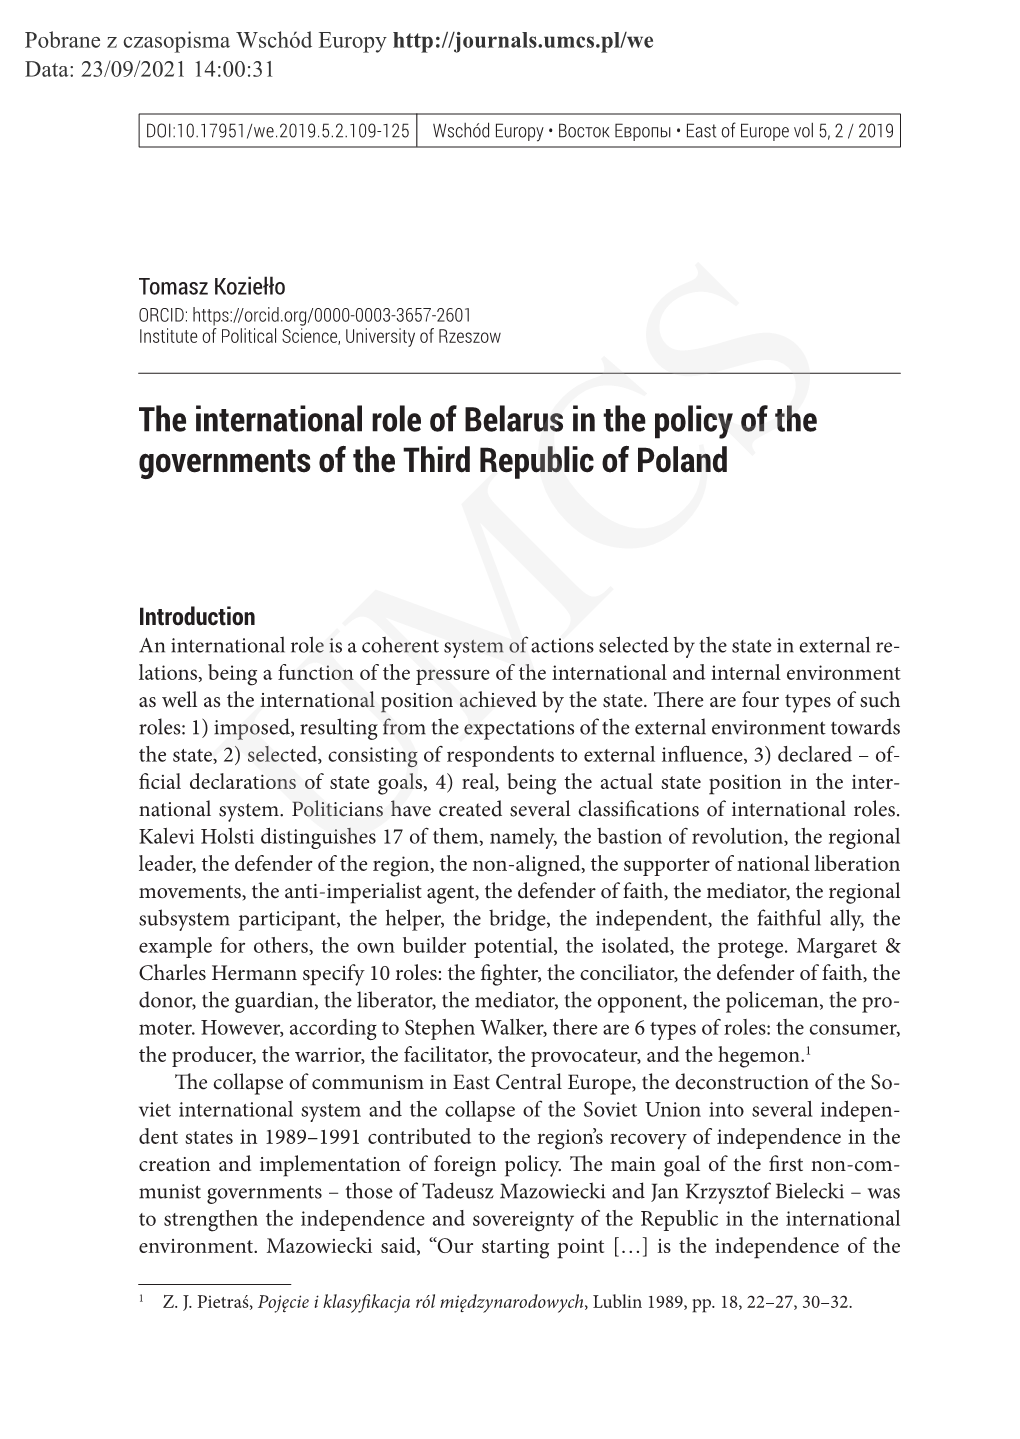 The International Role of Belarus in the Policy of the Governments of the Third Republic of Poland